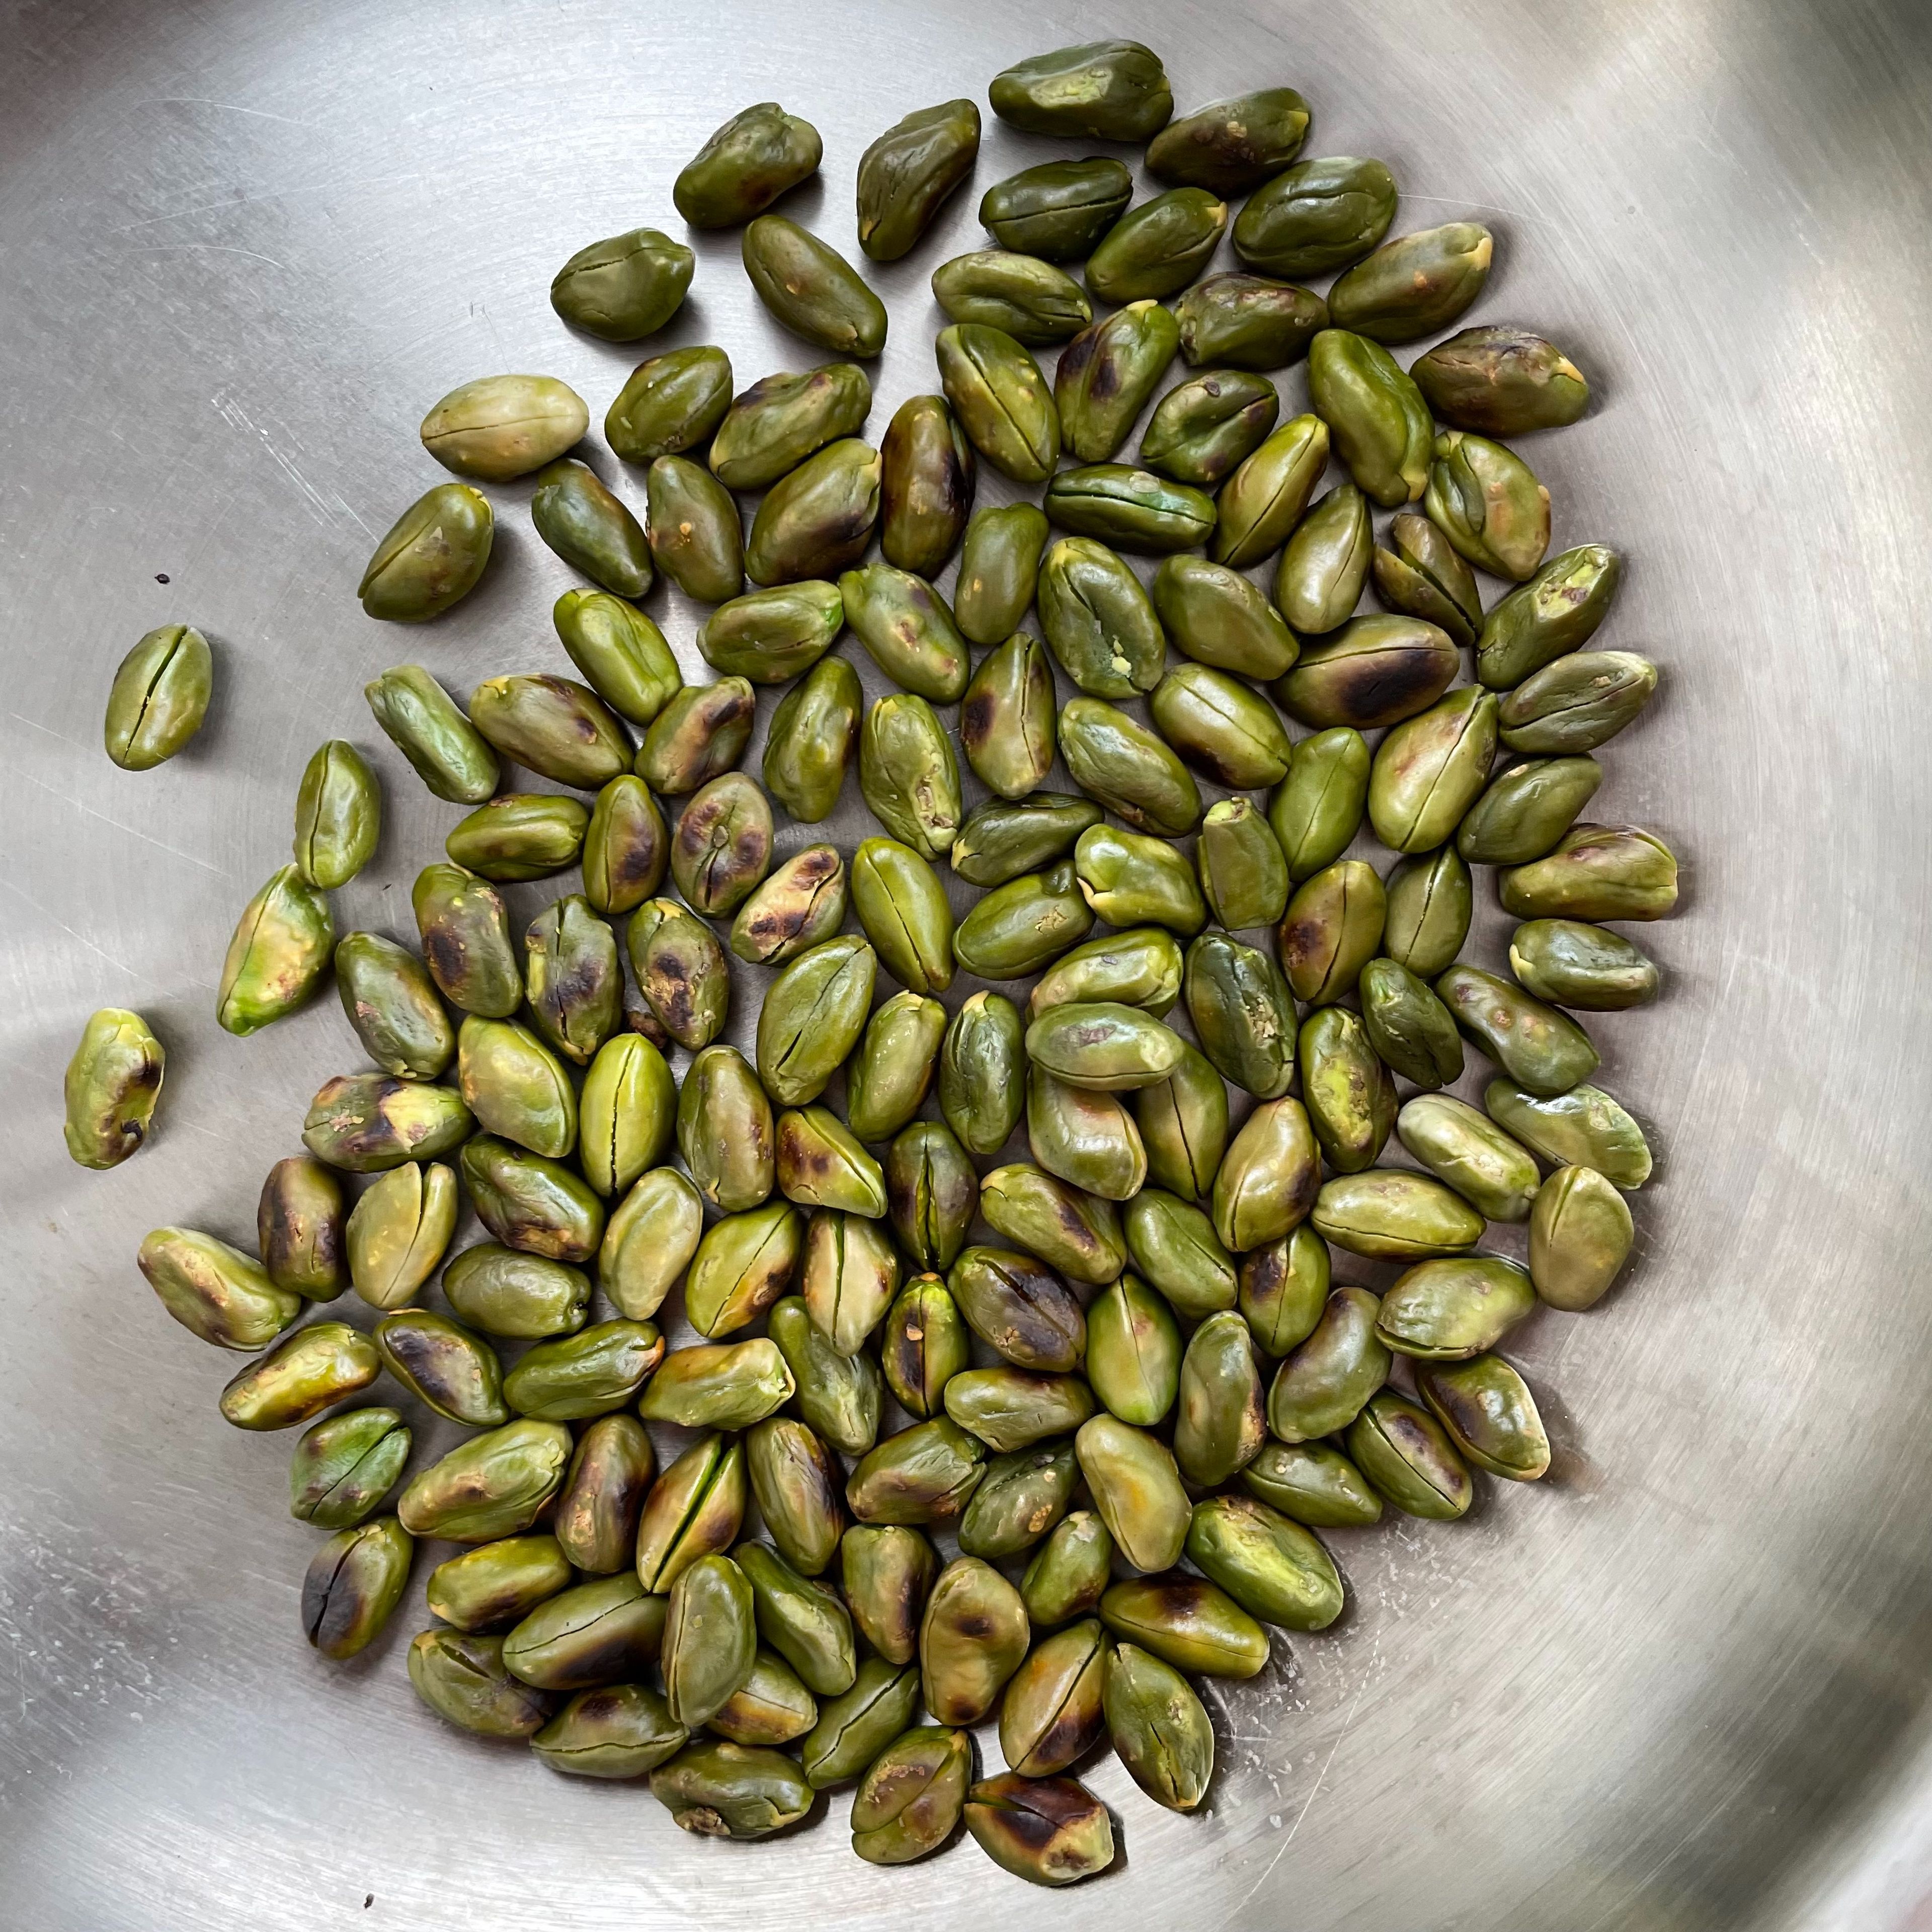 In a small pan without oil, toast the pistachios for a few minutes.